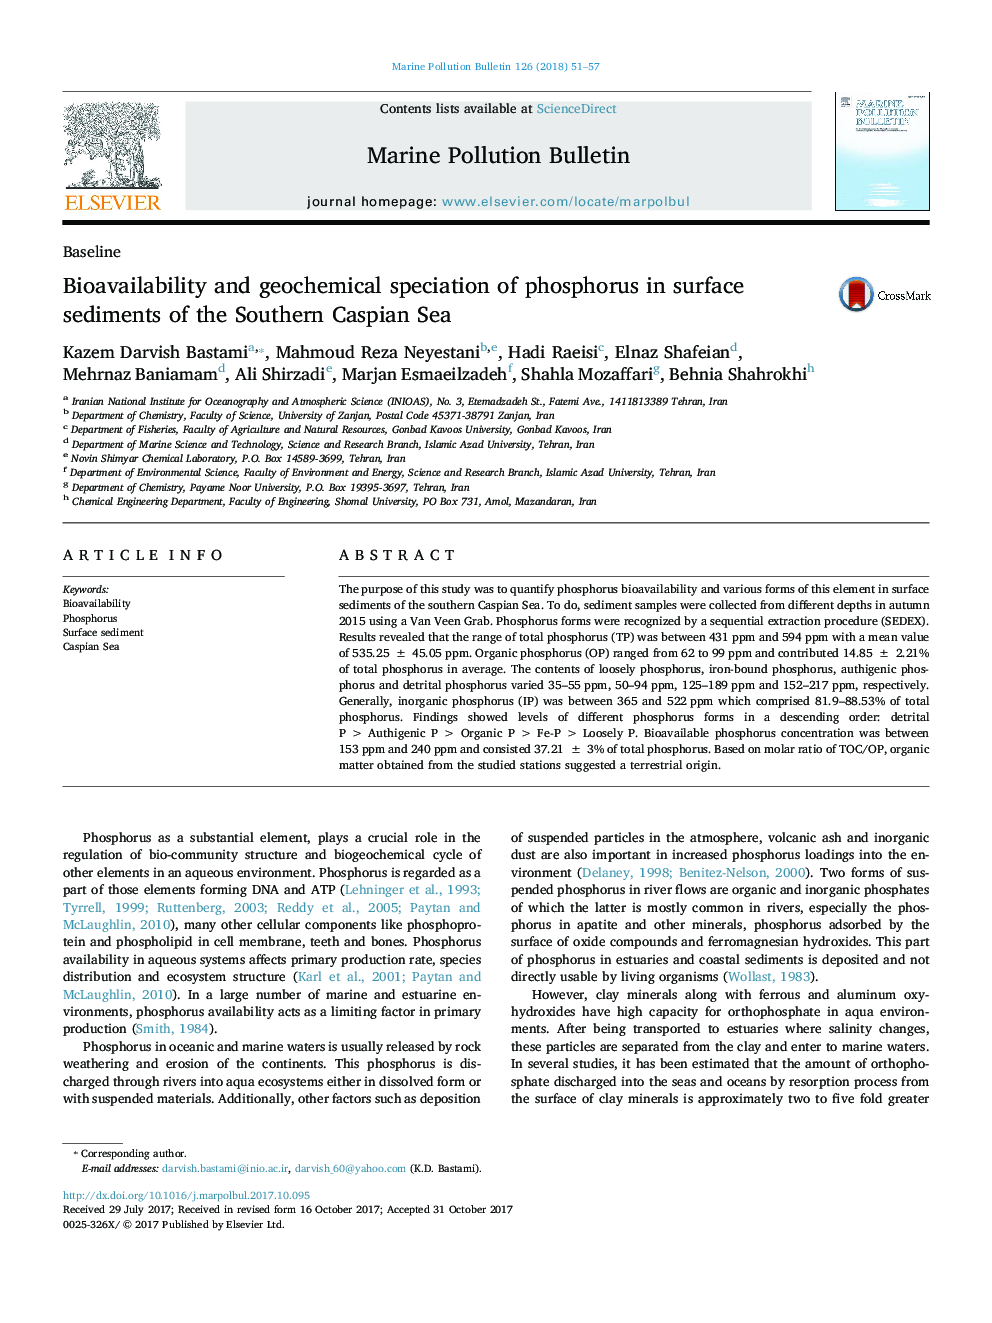 Bioavailability and geochemical speciation of phosphorus in surface sediments of the Southern Caspian Sea